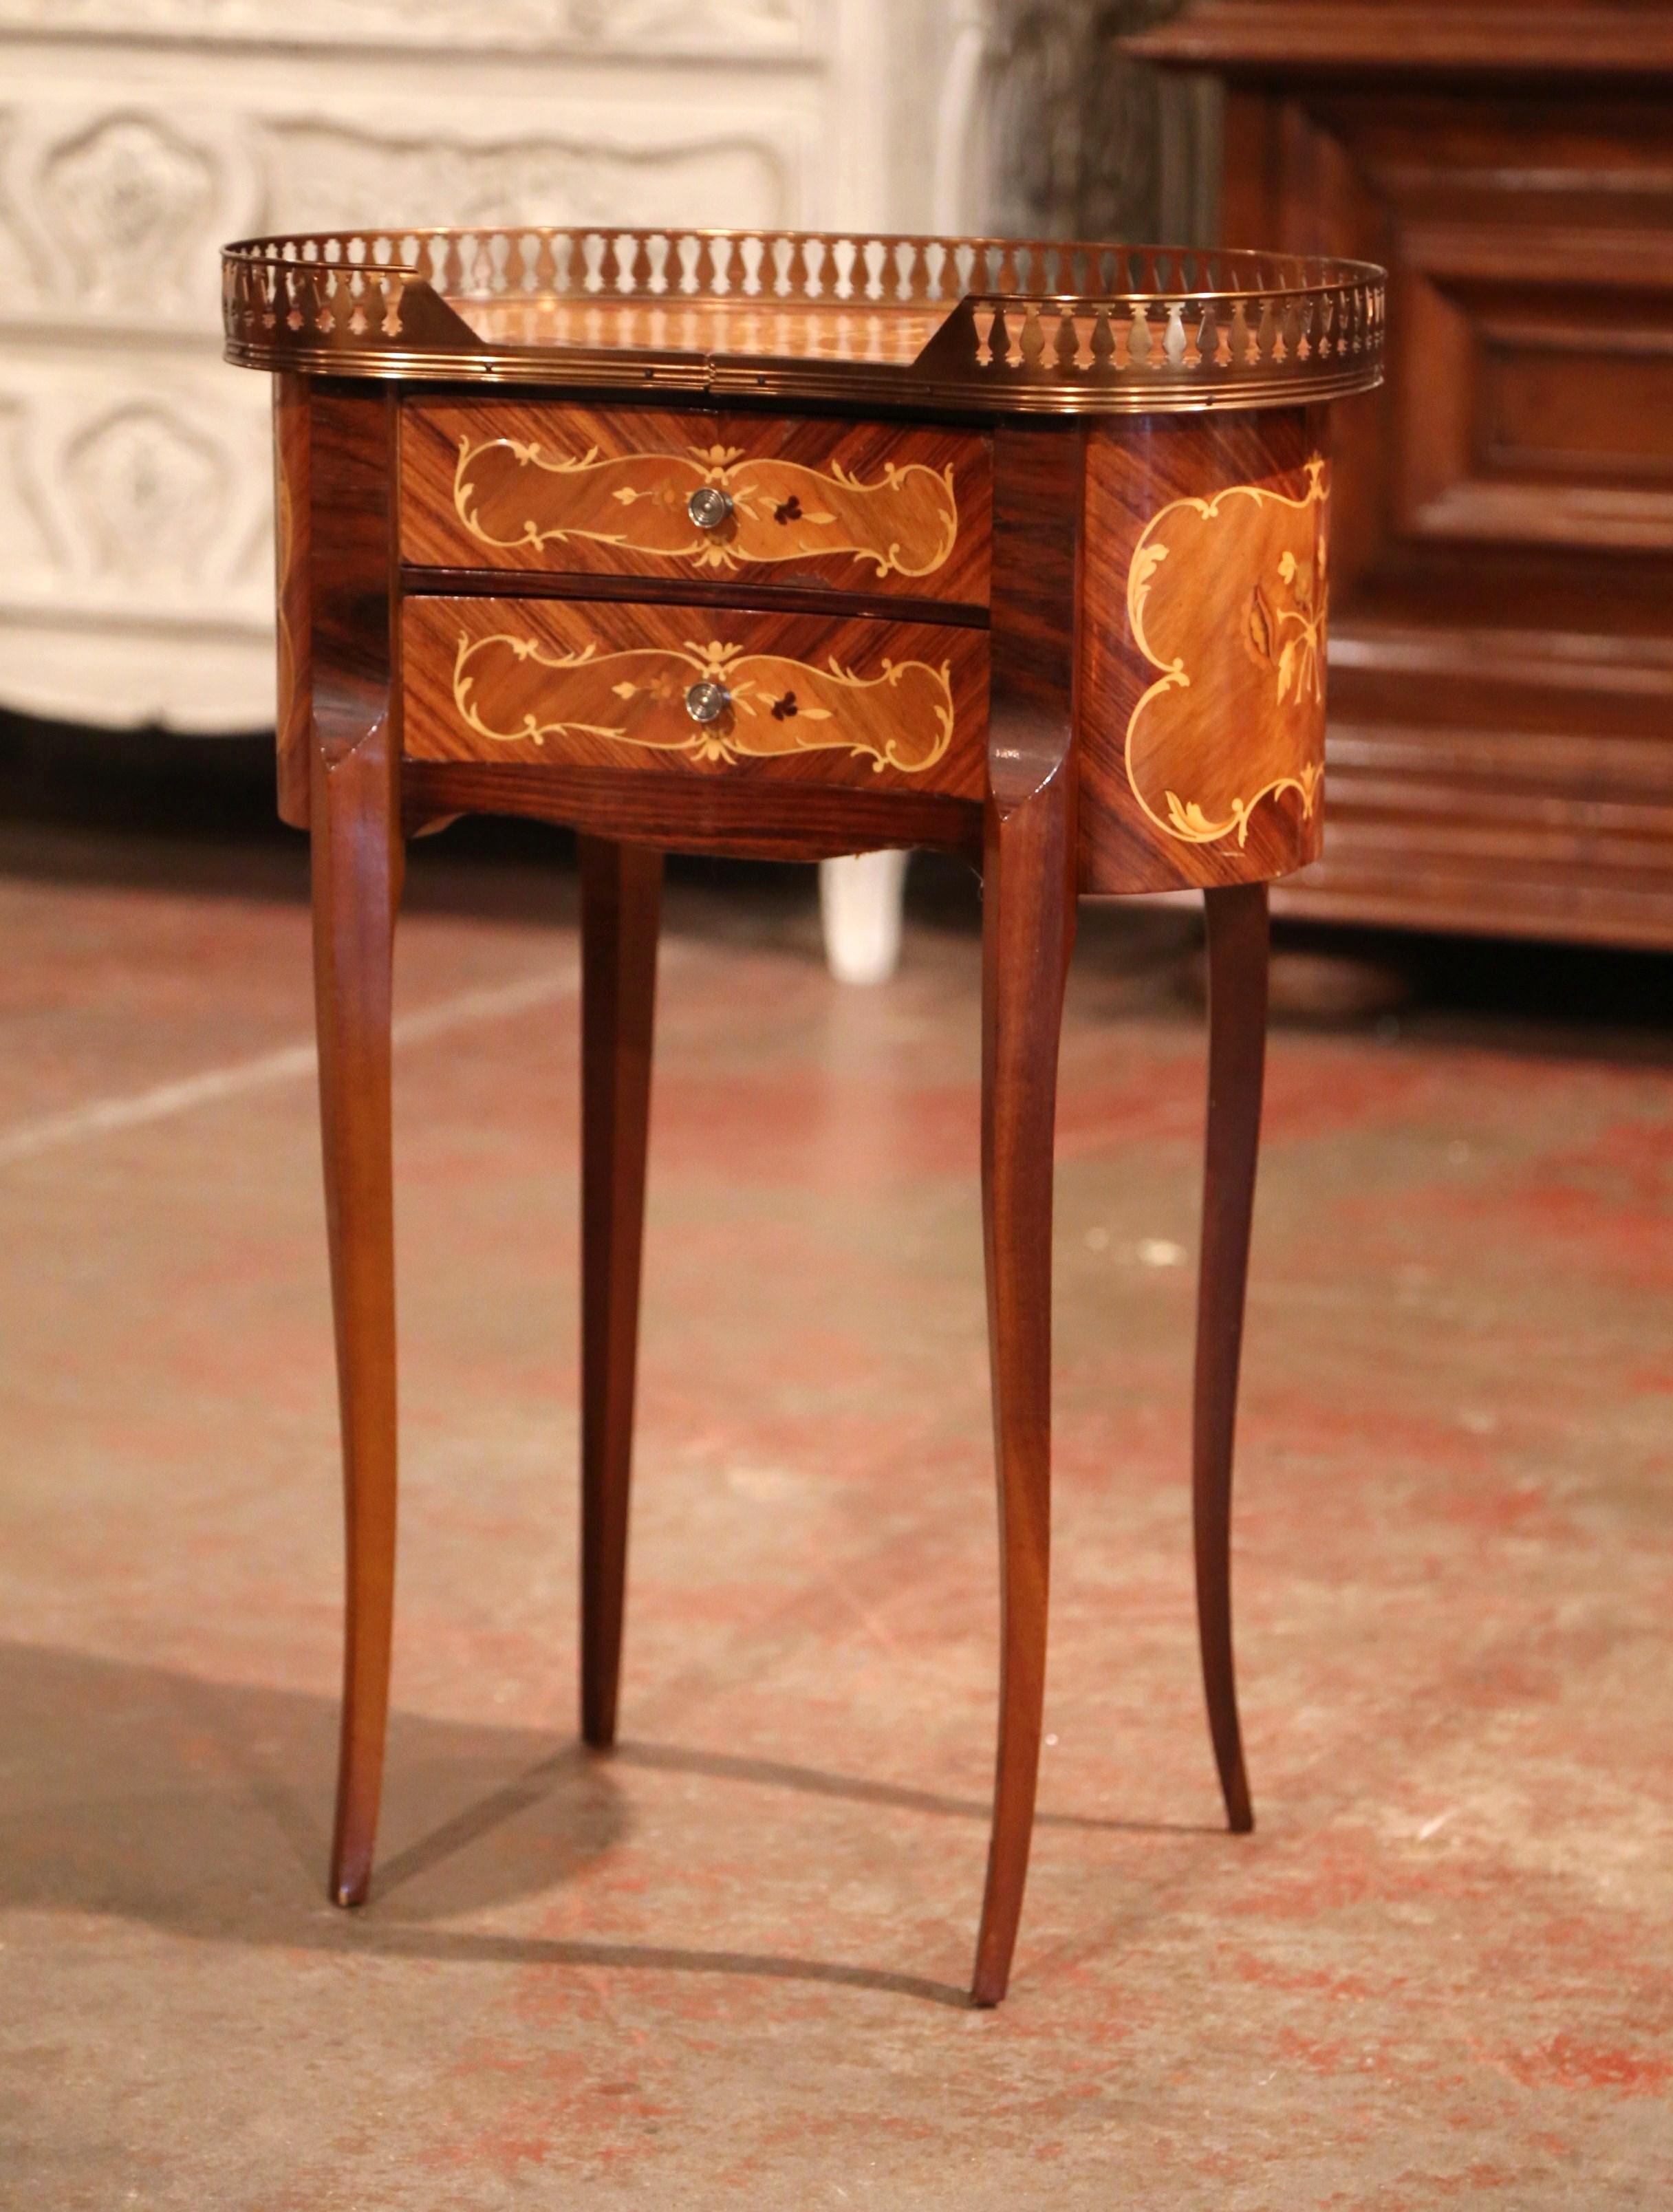 This elegant kidney shape fruitwood commode was crafted in Paris, circa 1980.The petite chest sits on slim cabriole legs and features two drawers with floral inlay decor and embellished with brass pulls. The top with an inset brass pierced gallery